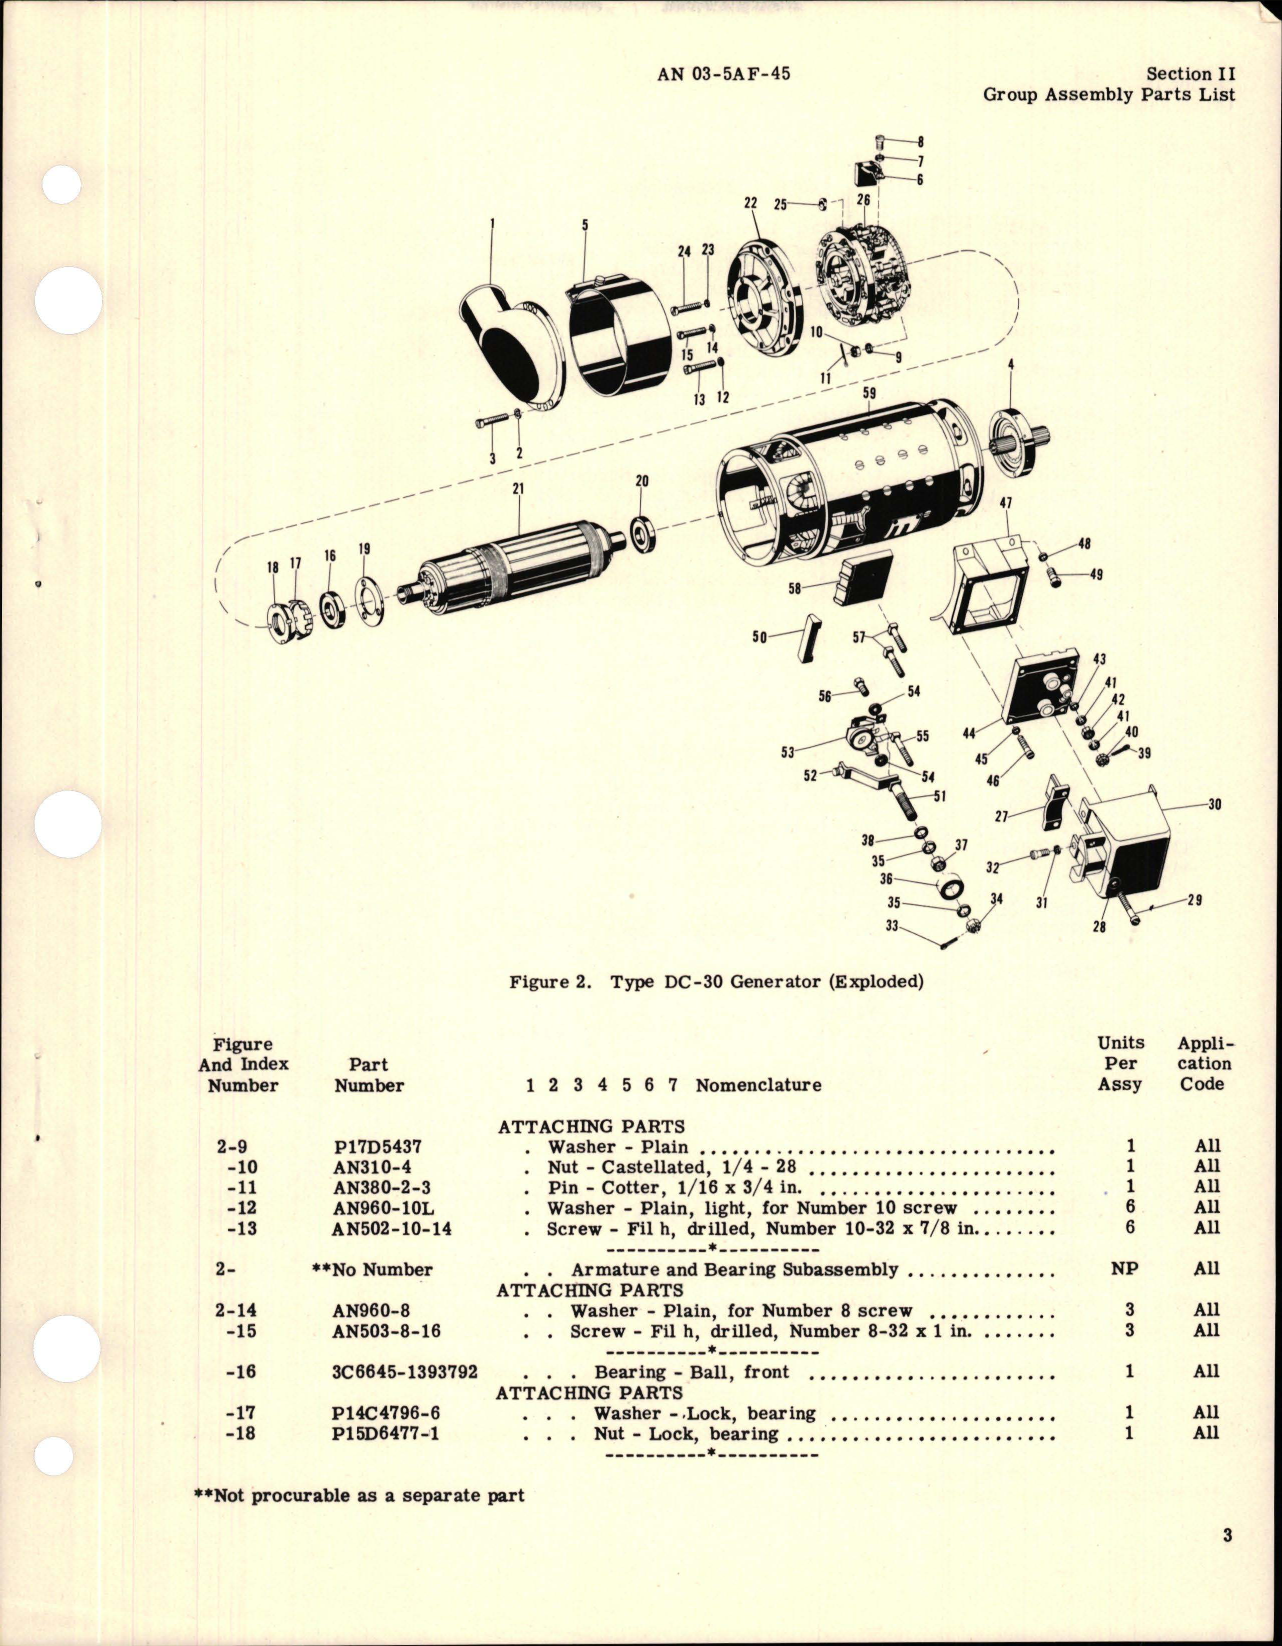 Sample page 5 from AirCorps Library document: Parts Catalog for DC-30 Generator - Part A19A6161